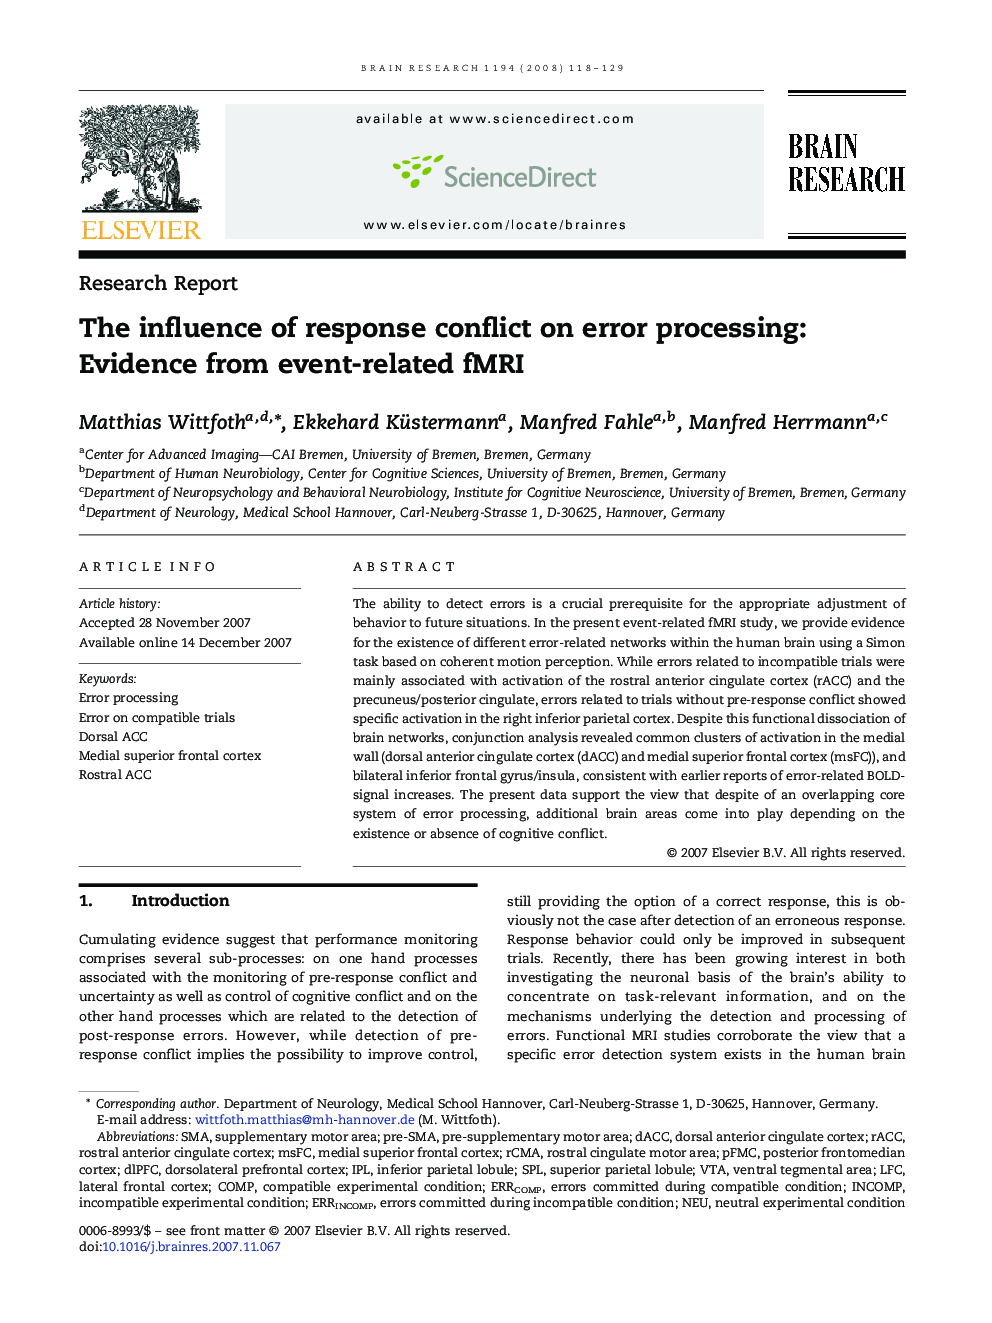 Research ReportThe influence of response conflict on error processing: Evidence from event-related fMRI